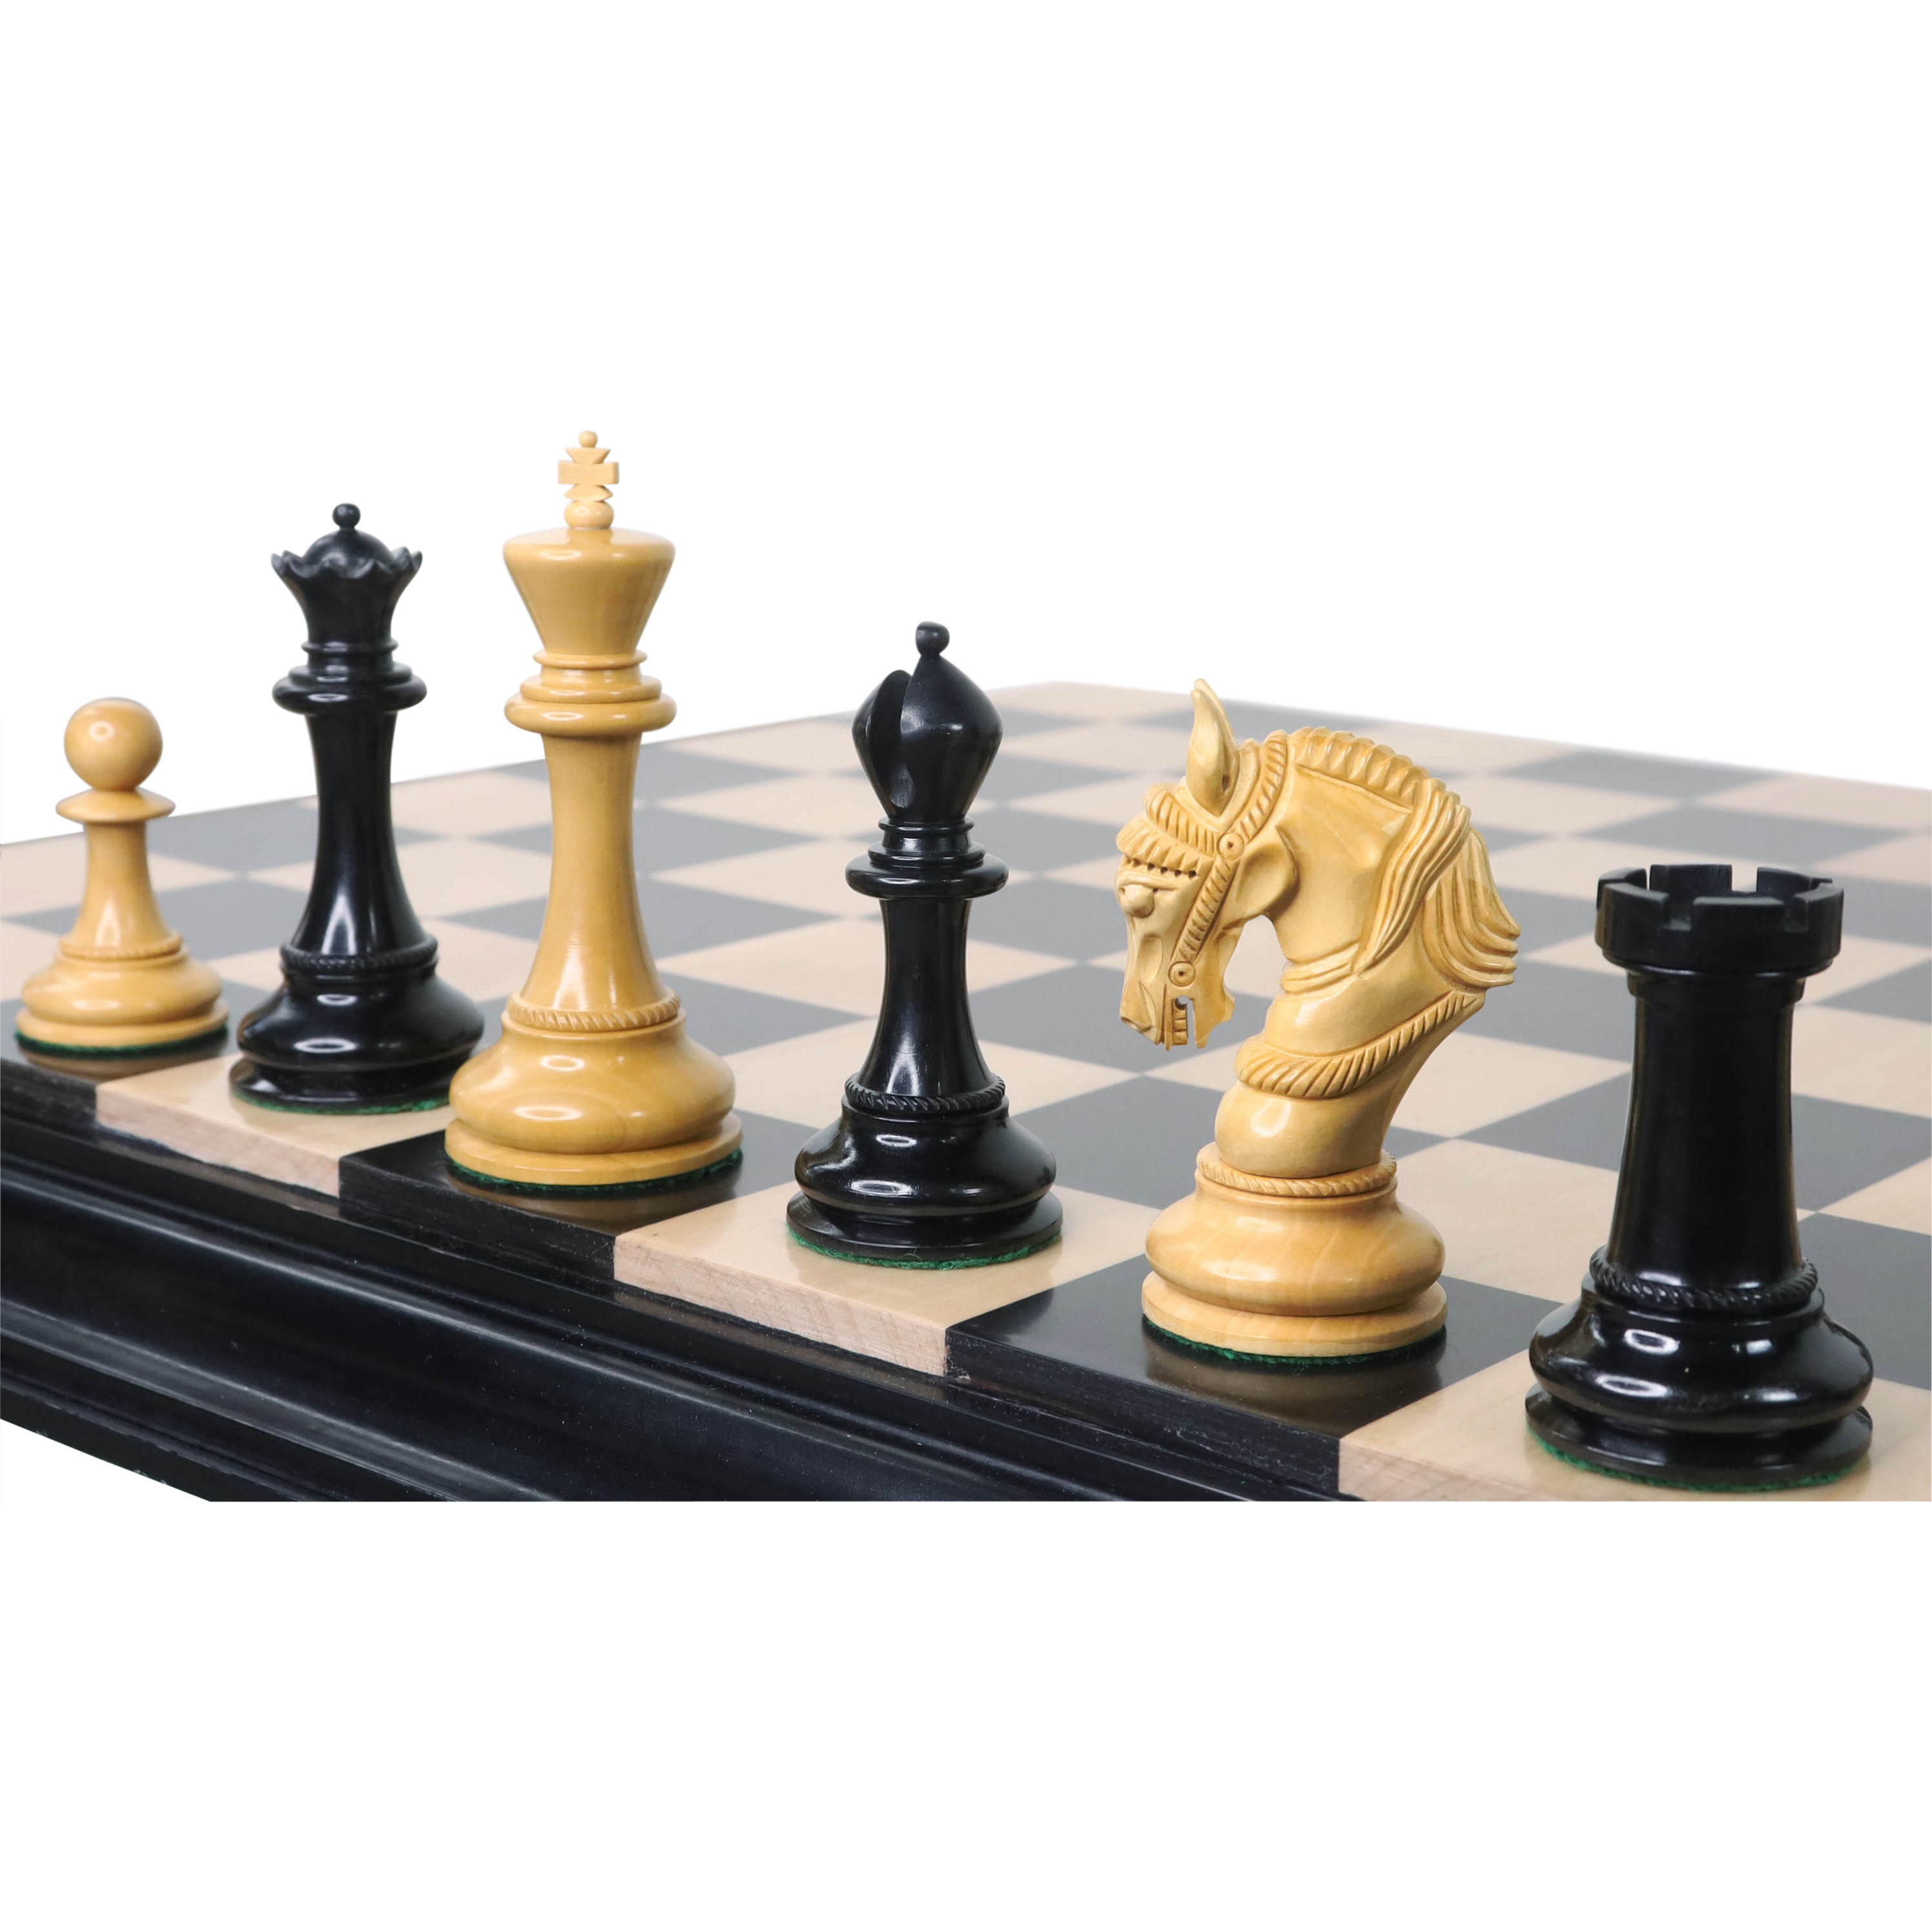 Royal Chess Mall - Back in Stock! Luxury Chess Pieces AMERICAN